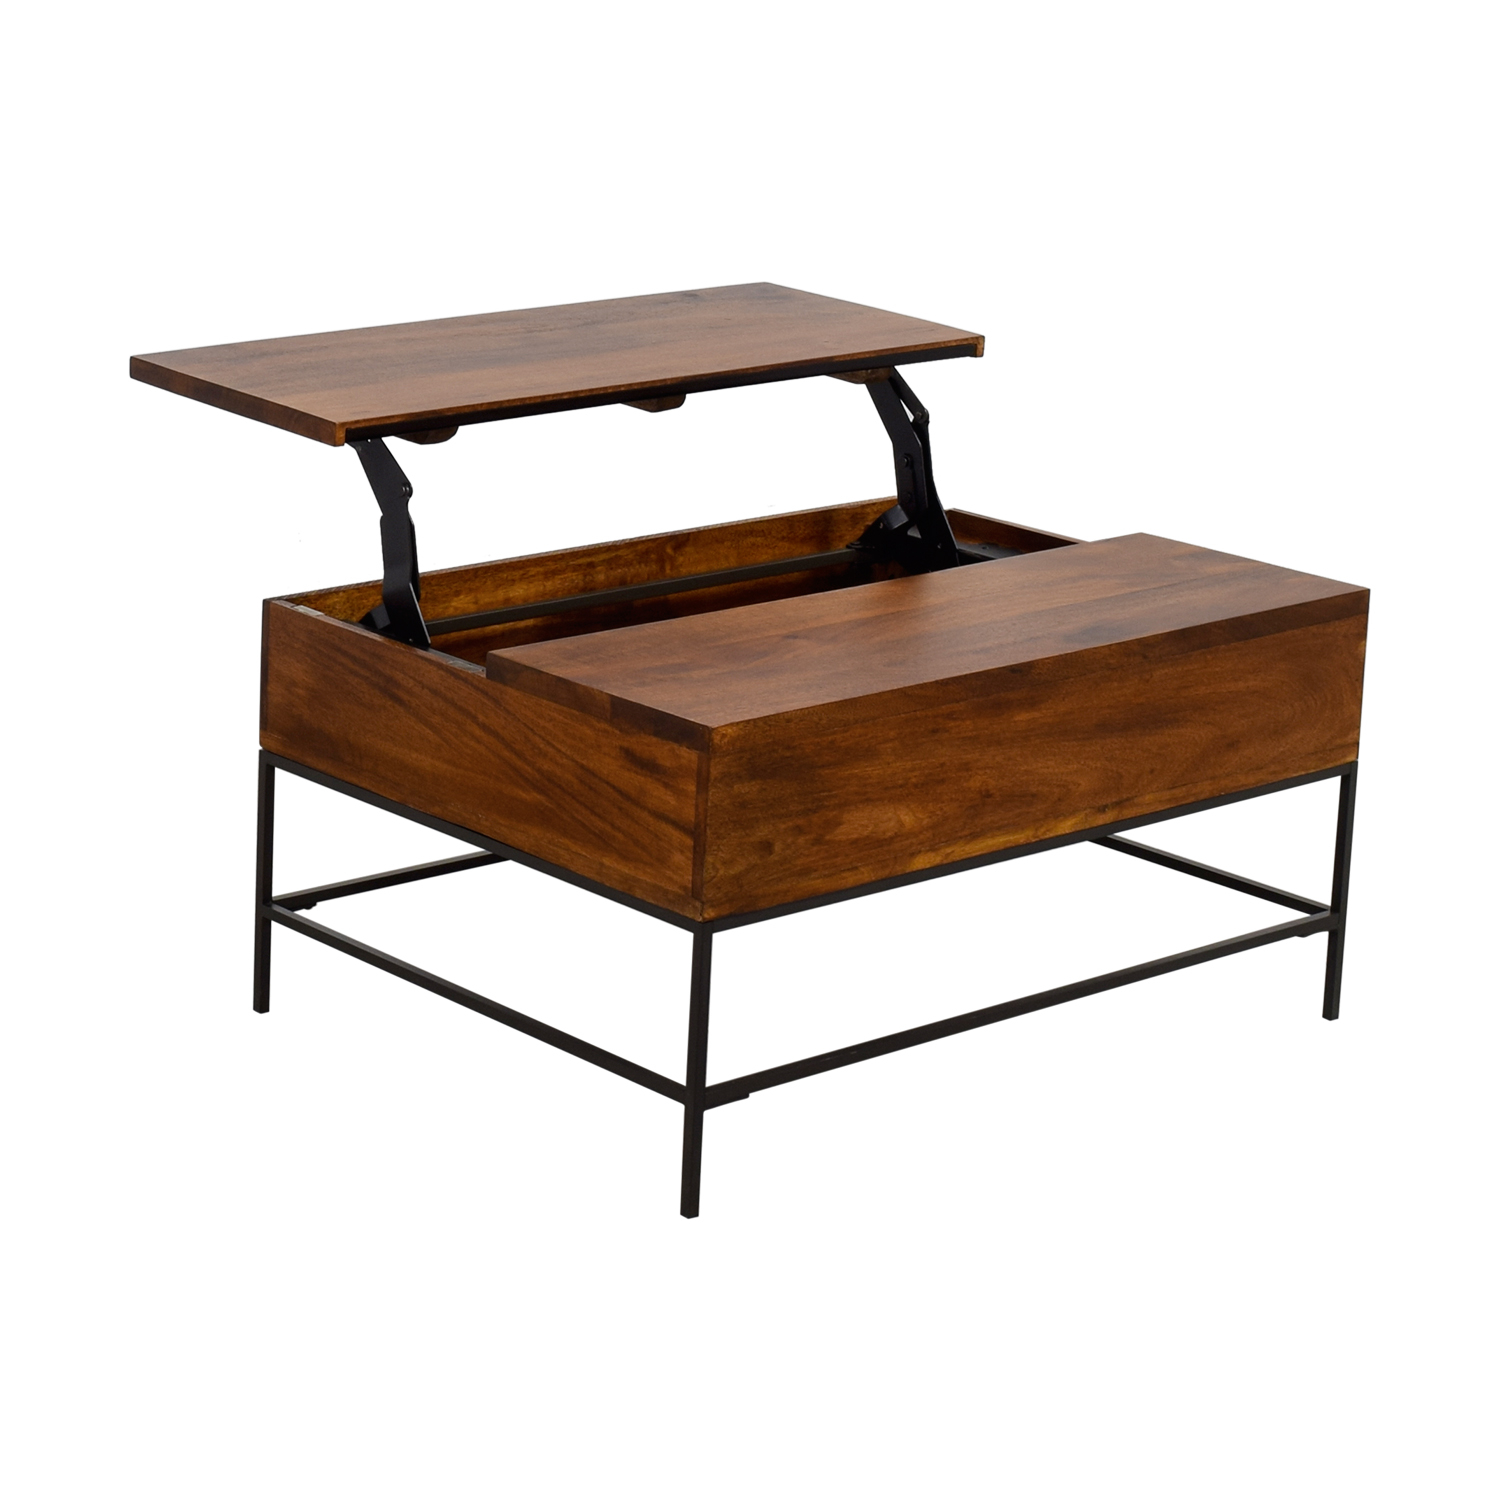 Origami Coffee Table West Elm 44 Off West Elm West Elm Industrial Storage Coffee Table Tables